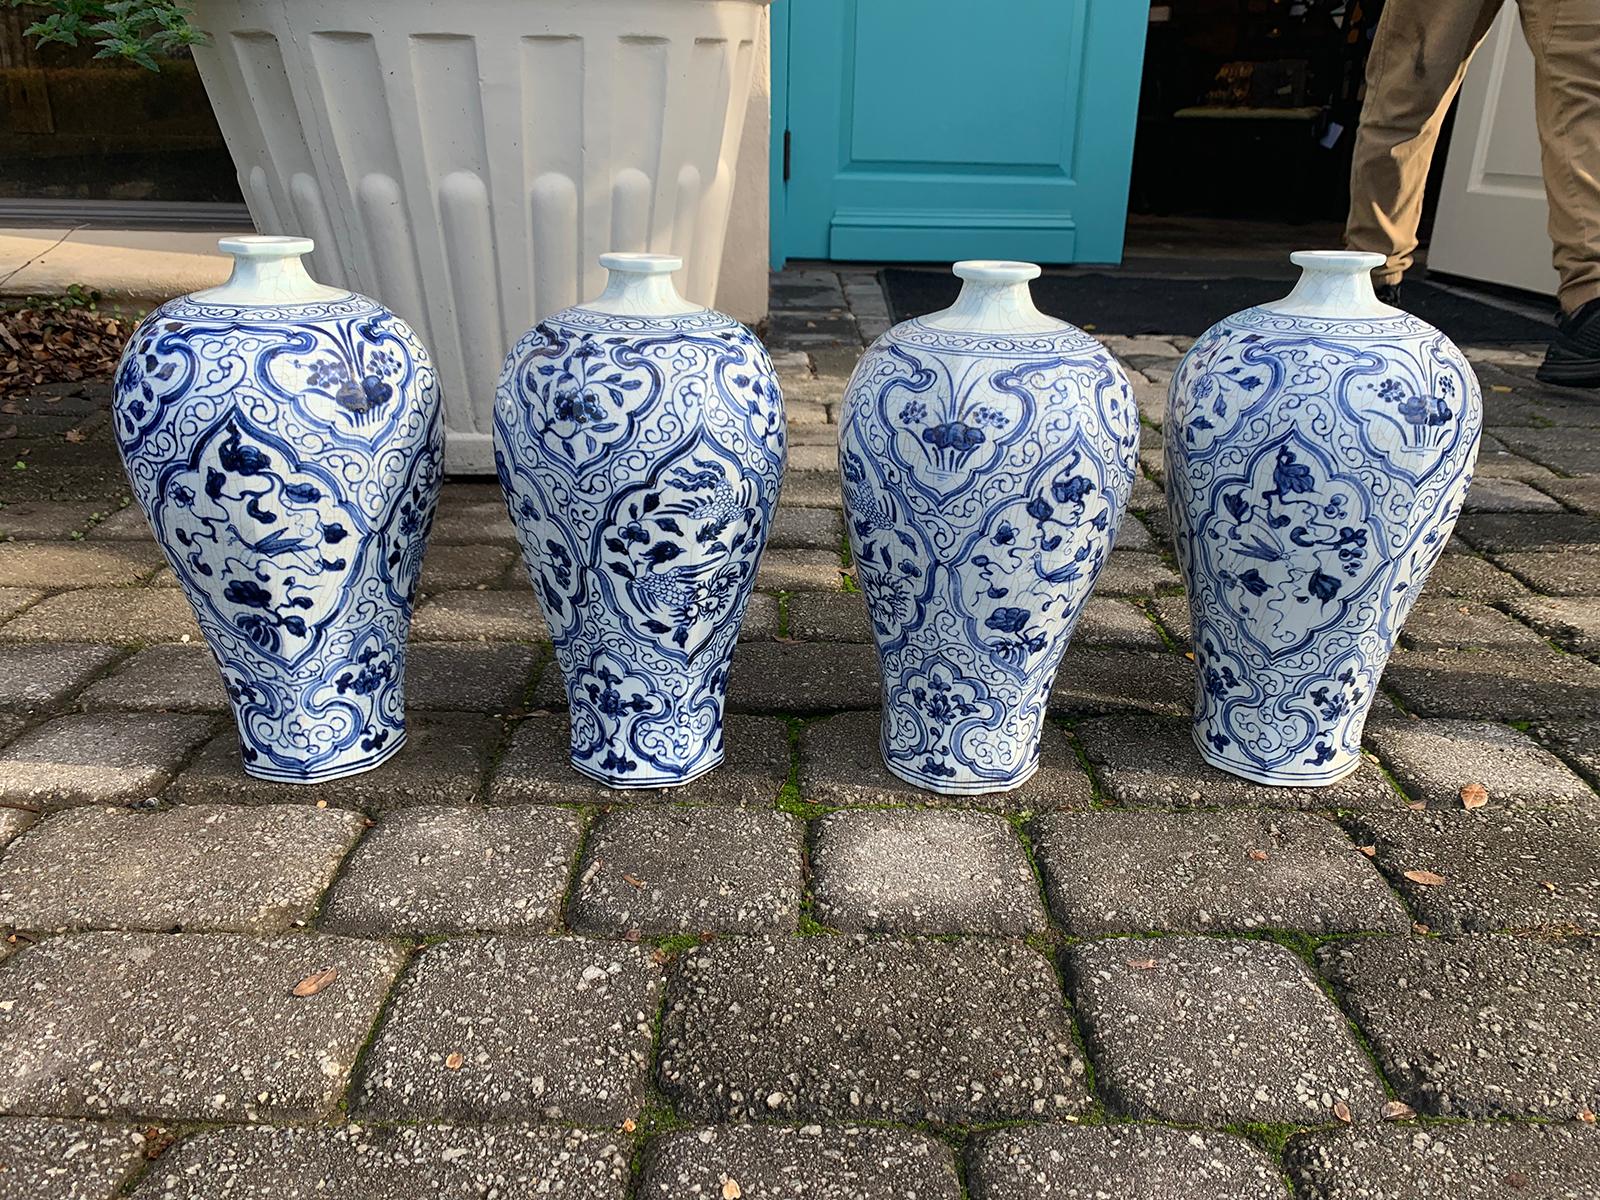 Set of four 20th century blue and white porcelain vases.